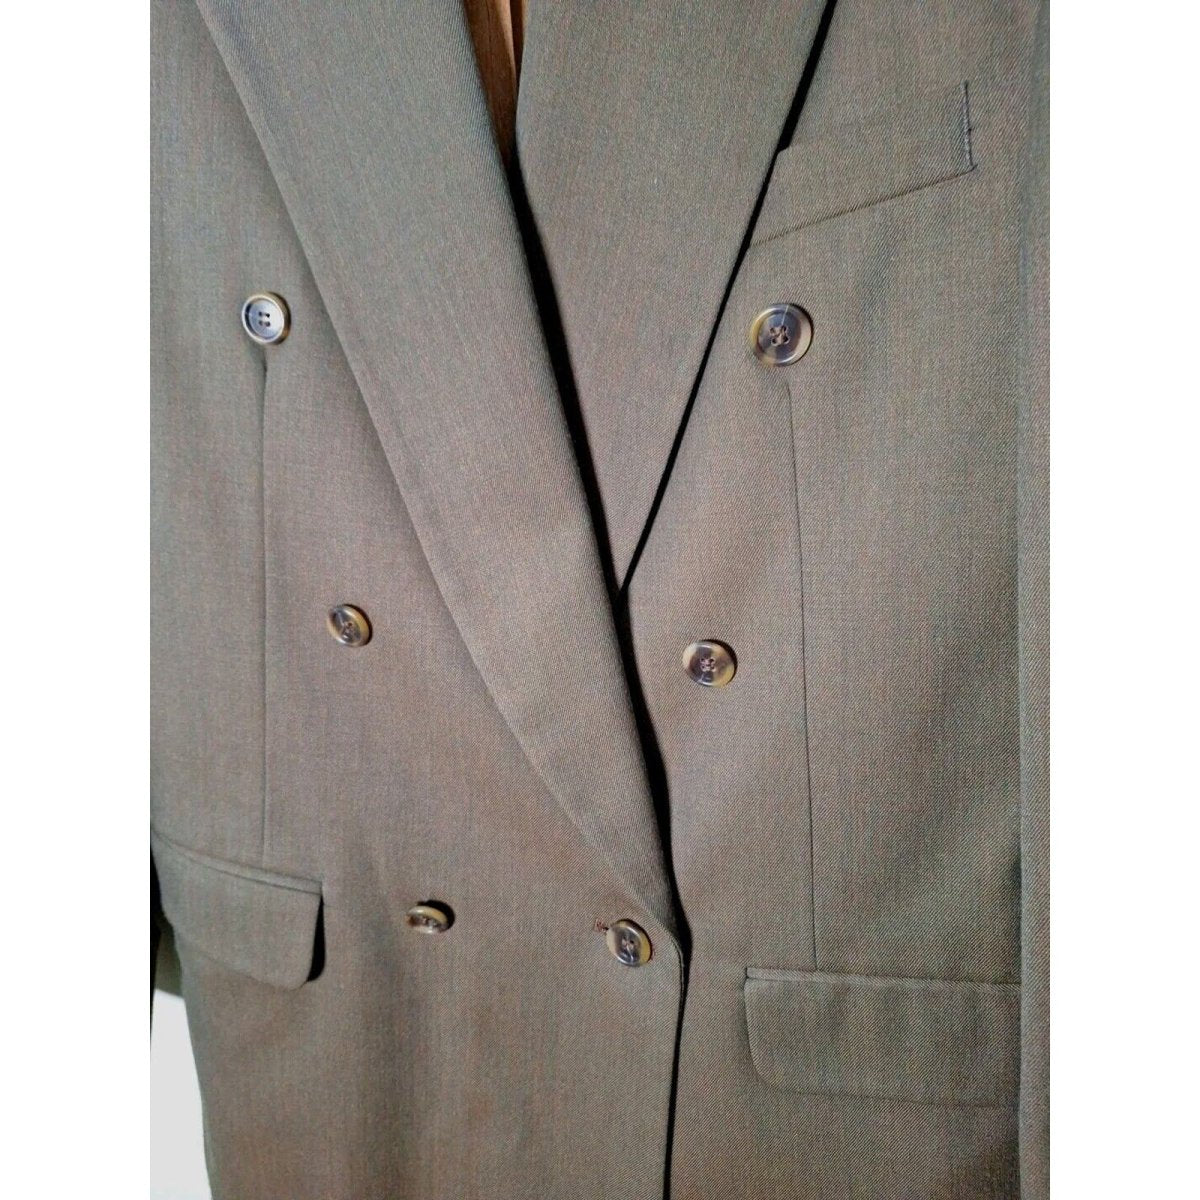 Vintage Olive Green Peak Lapel Double Breasted Blazer Jacket Men Size 39R - 40R - themallvintage The Mall Vintage 1980s 1990s Blazers